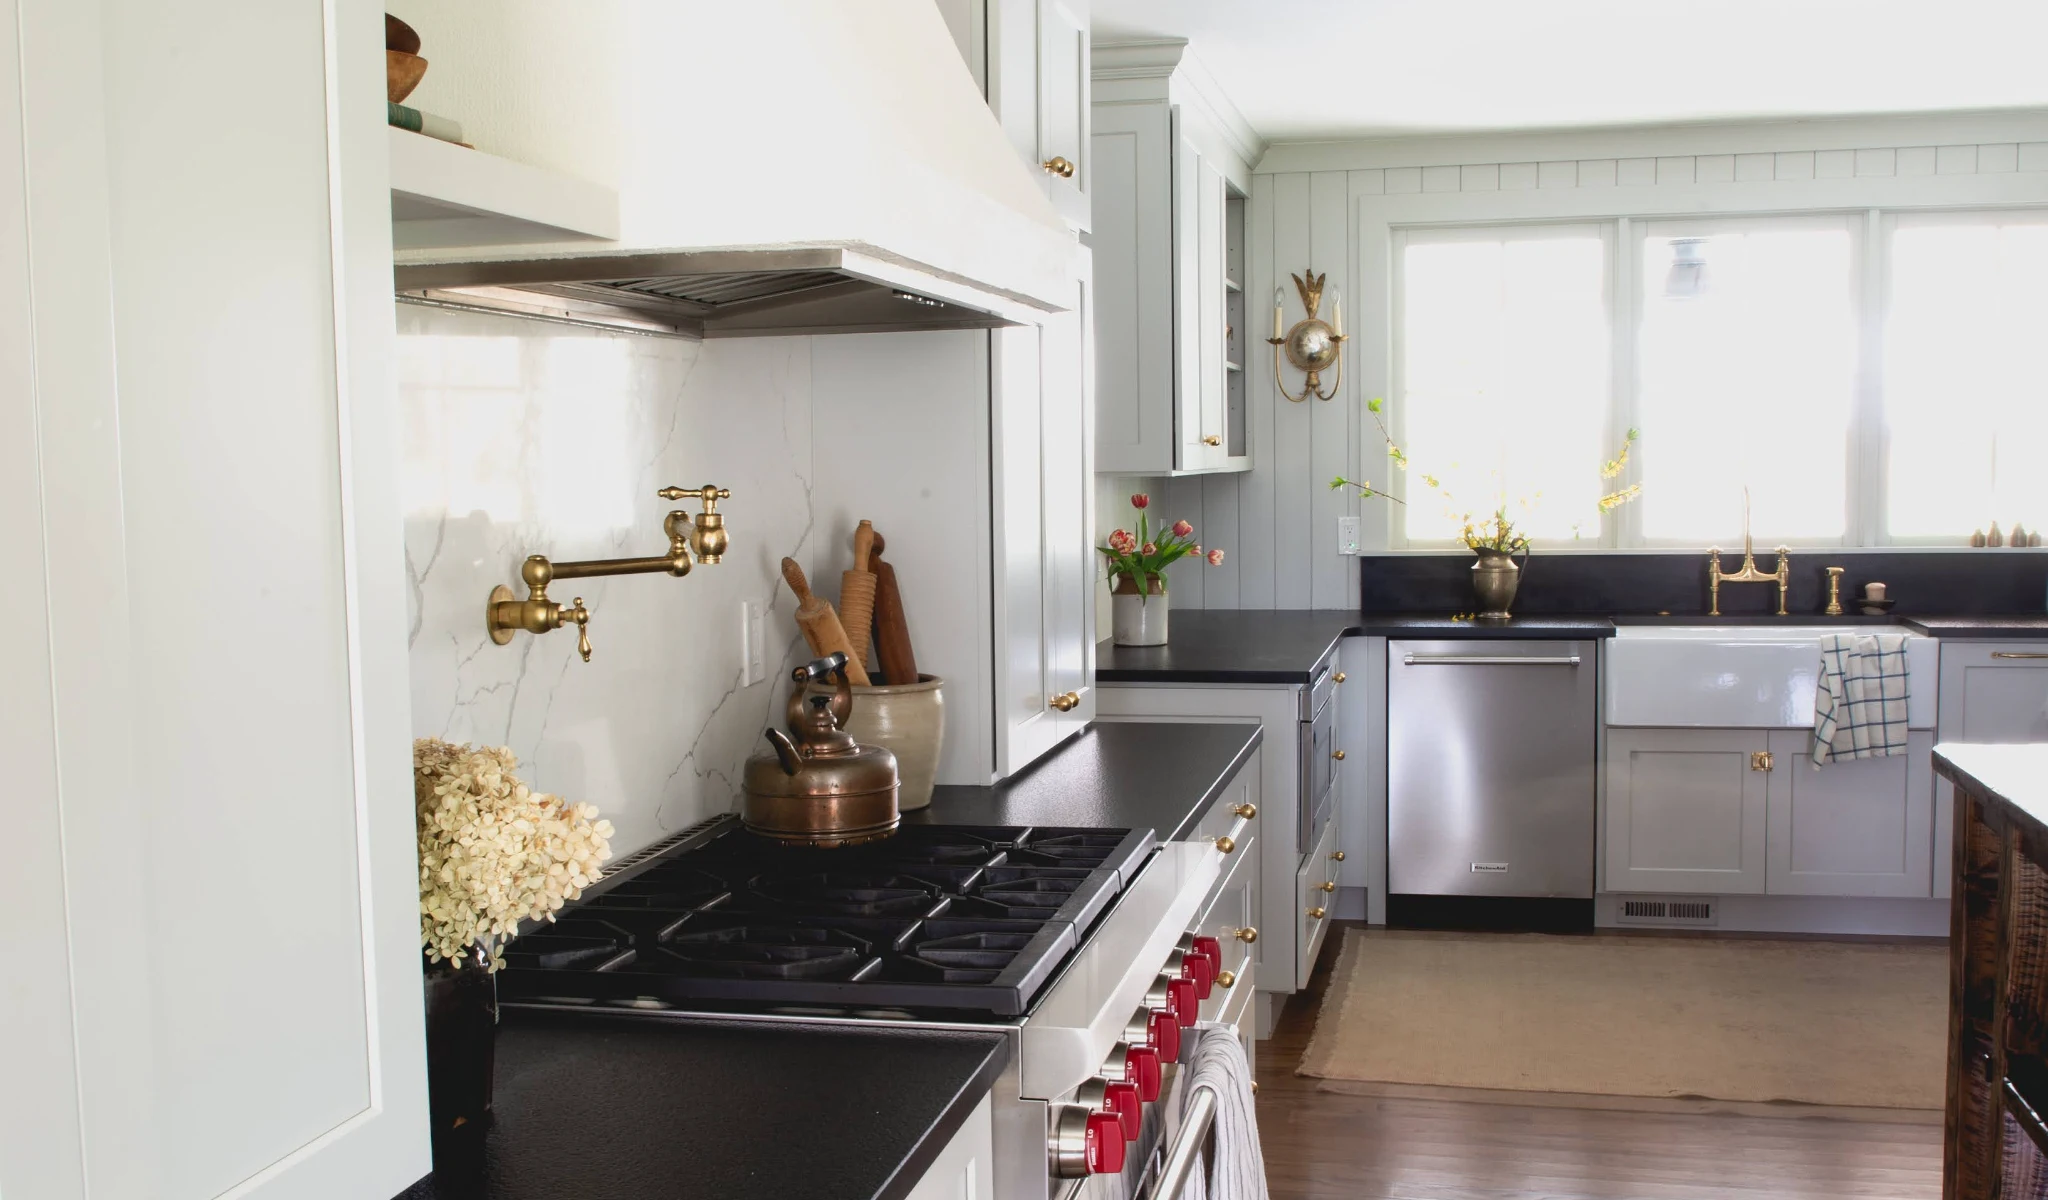 A kitchen with white cabinets and black countertops.